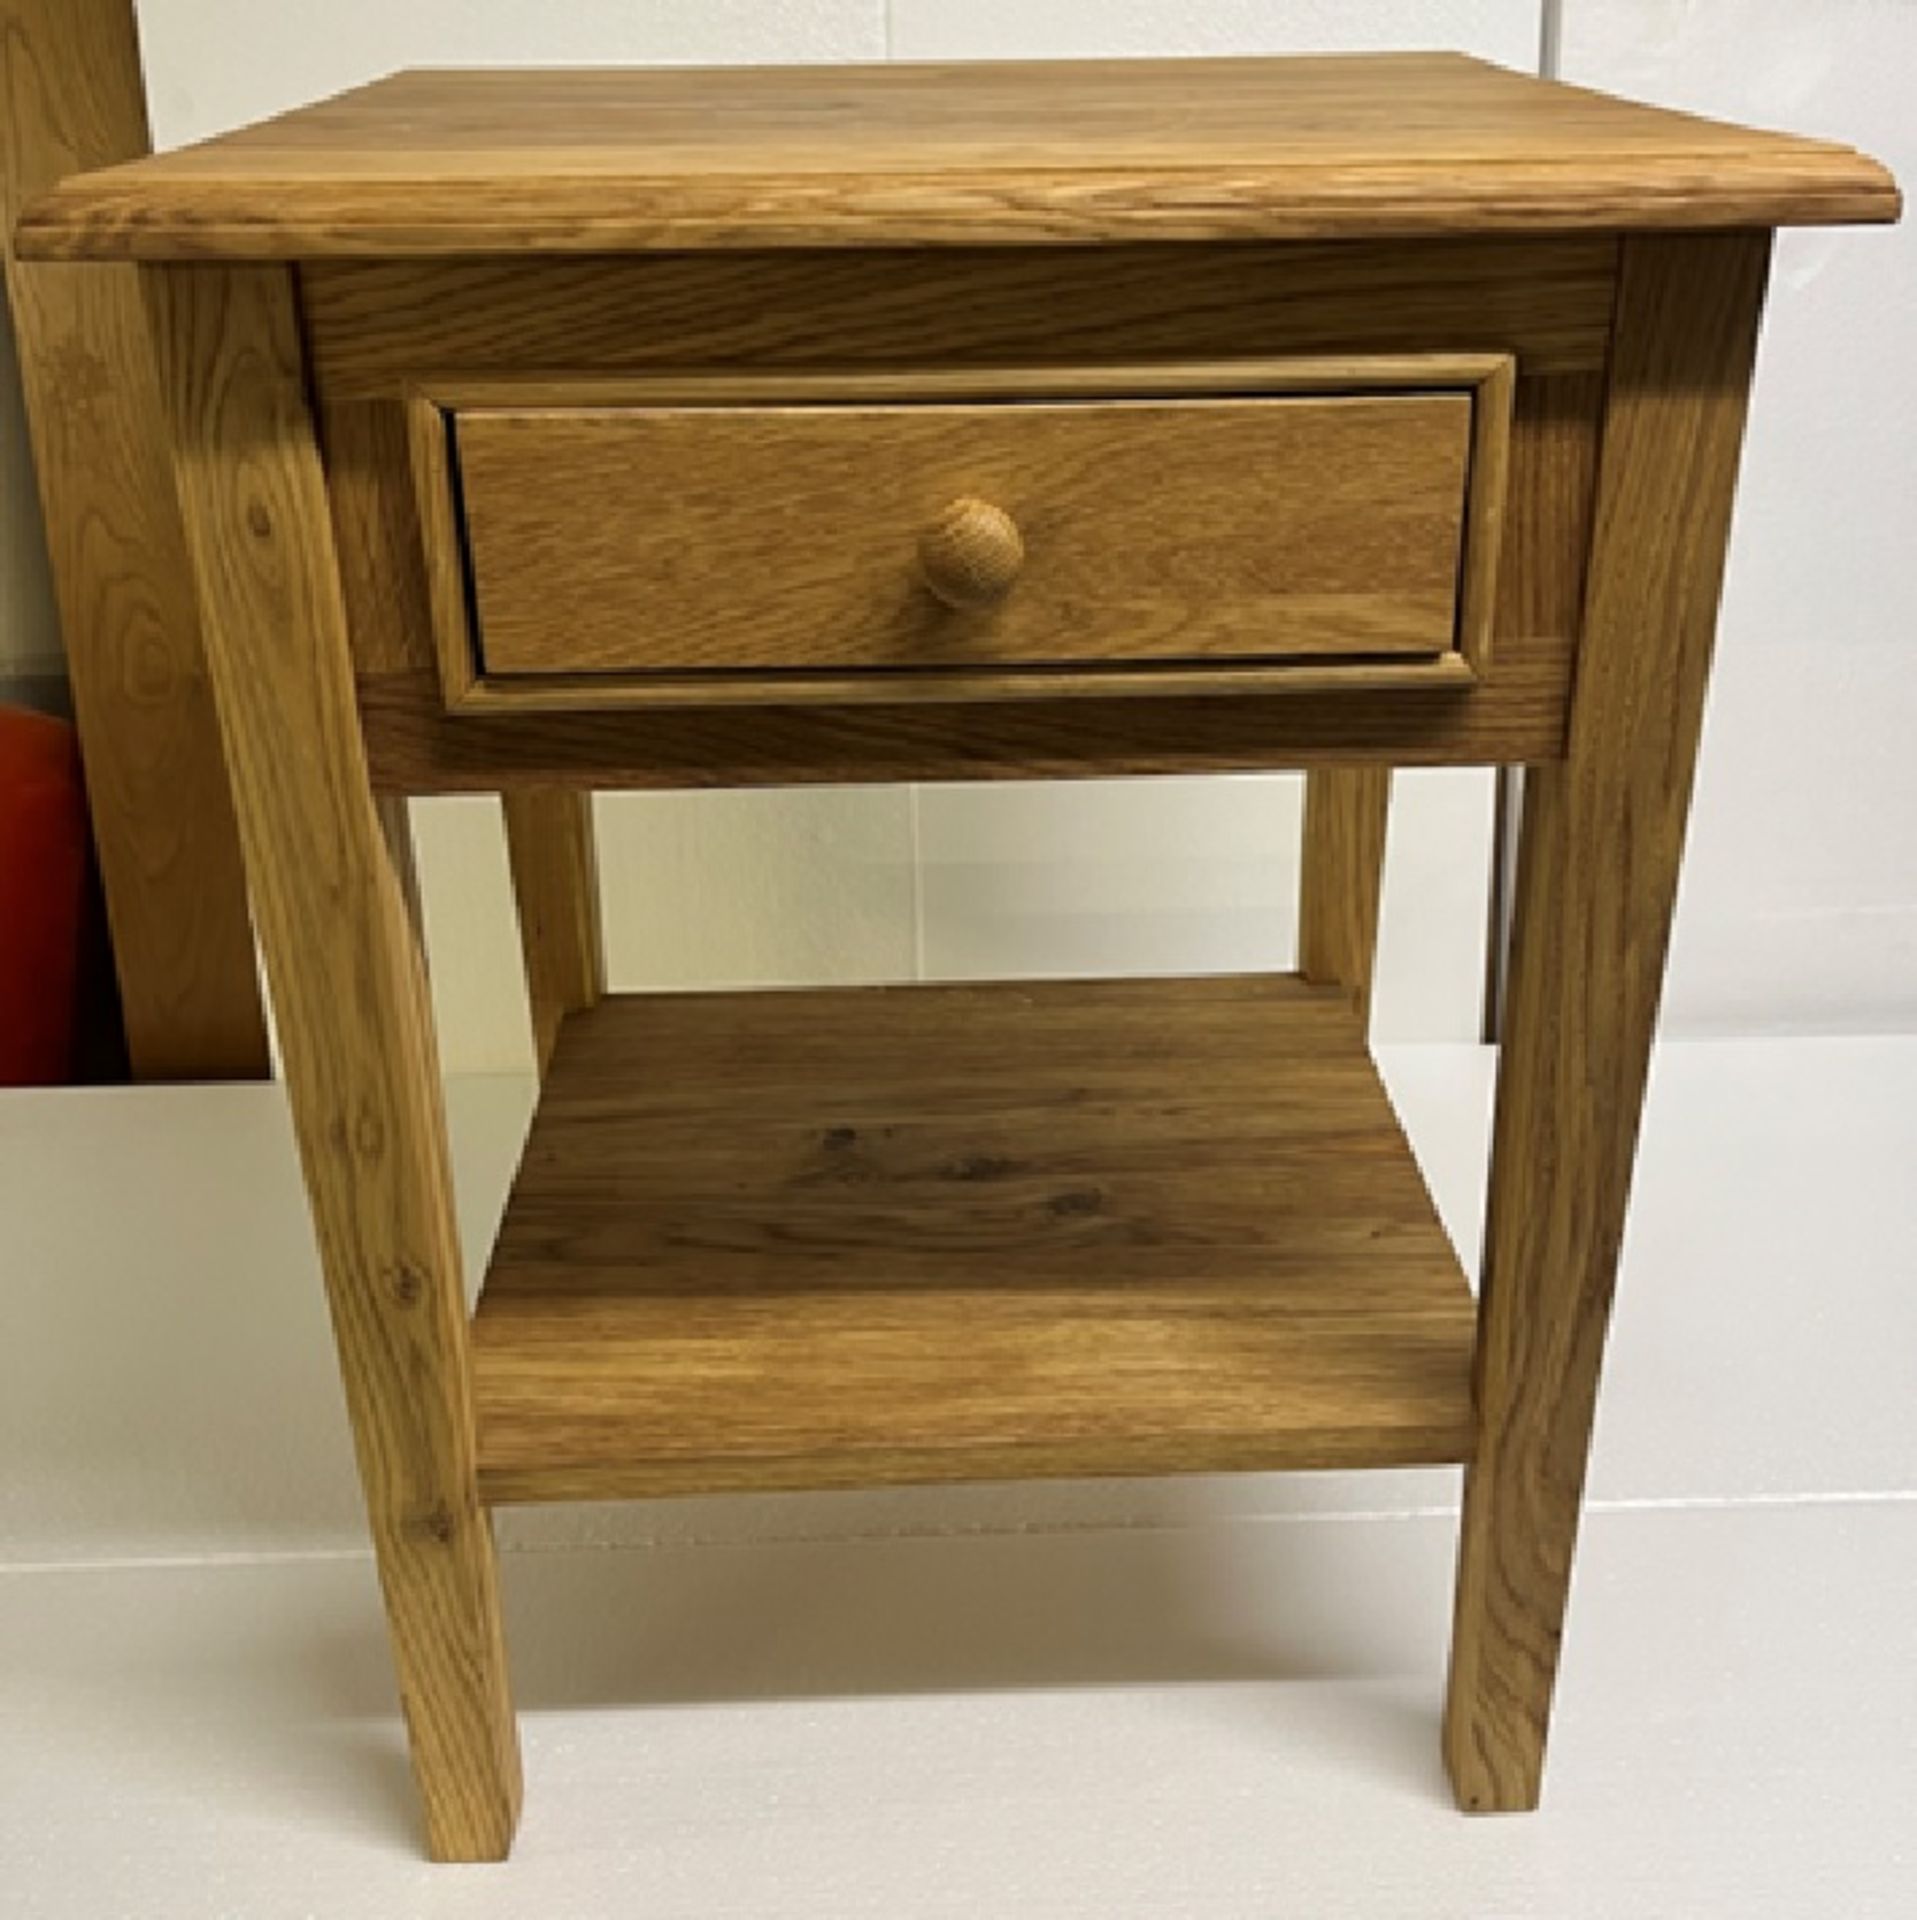 Egle Bedside Table Single Drawer with Shelf the epitome of chic cabinets. Crafted from oil-